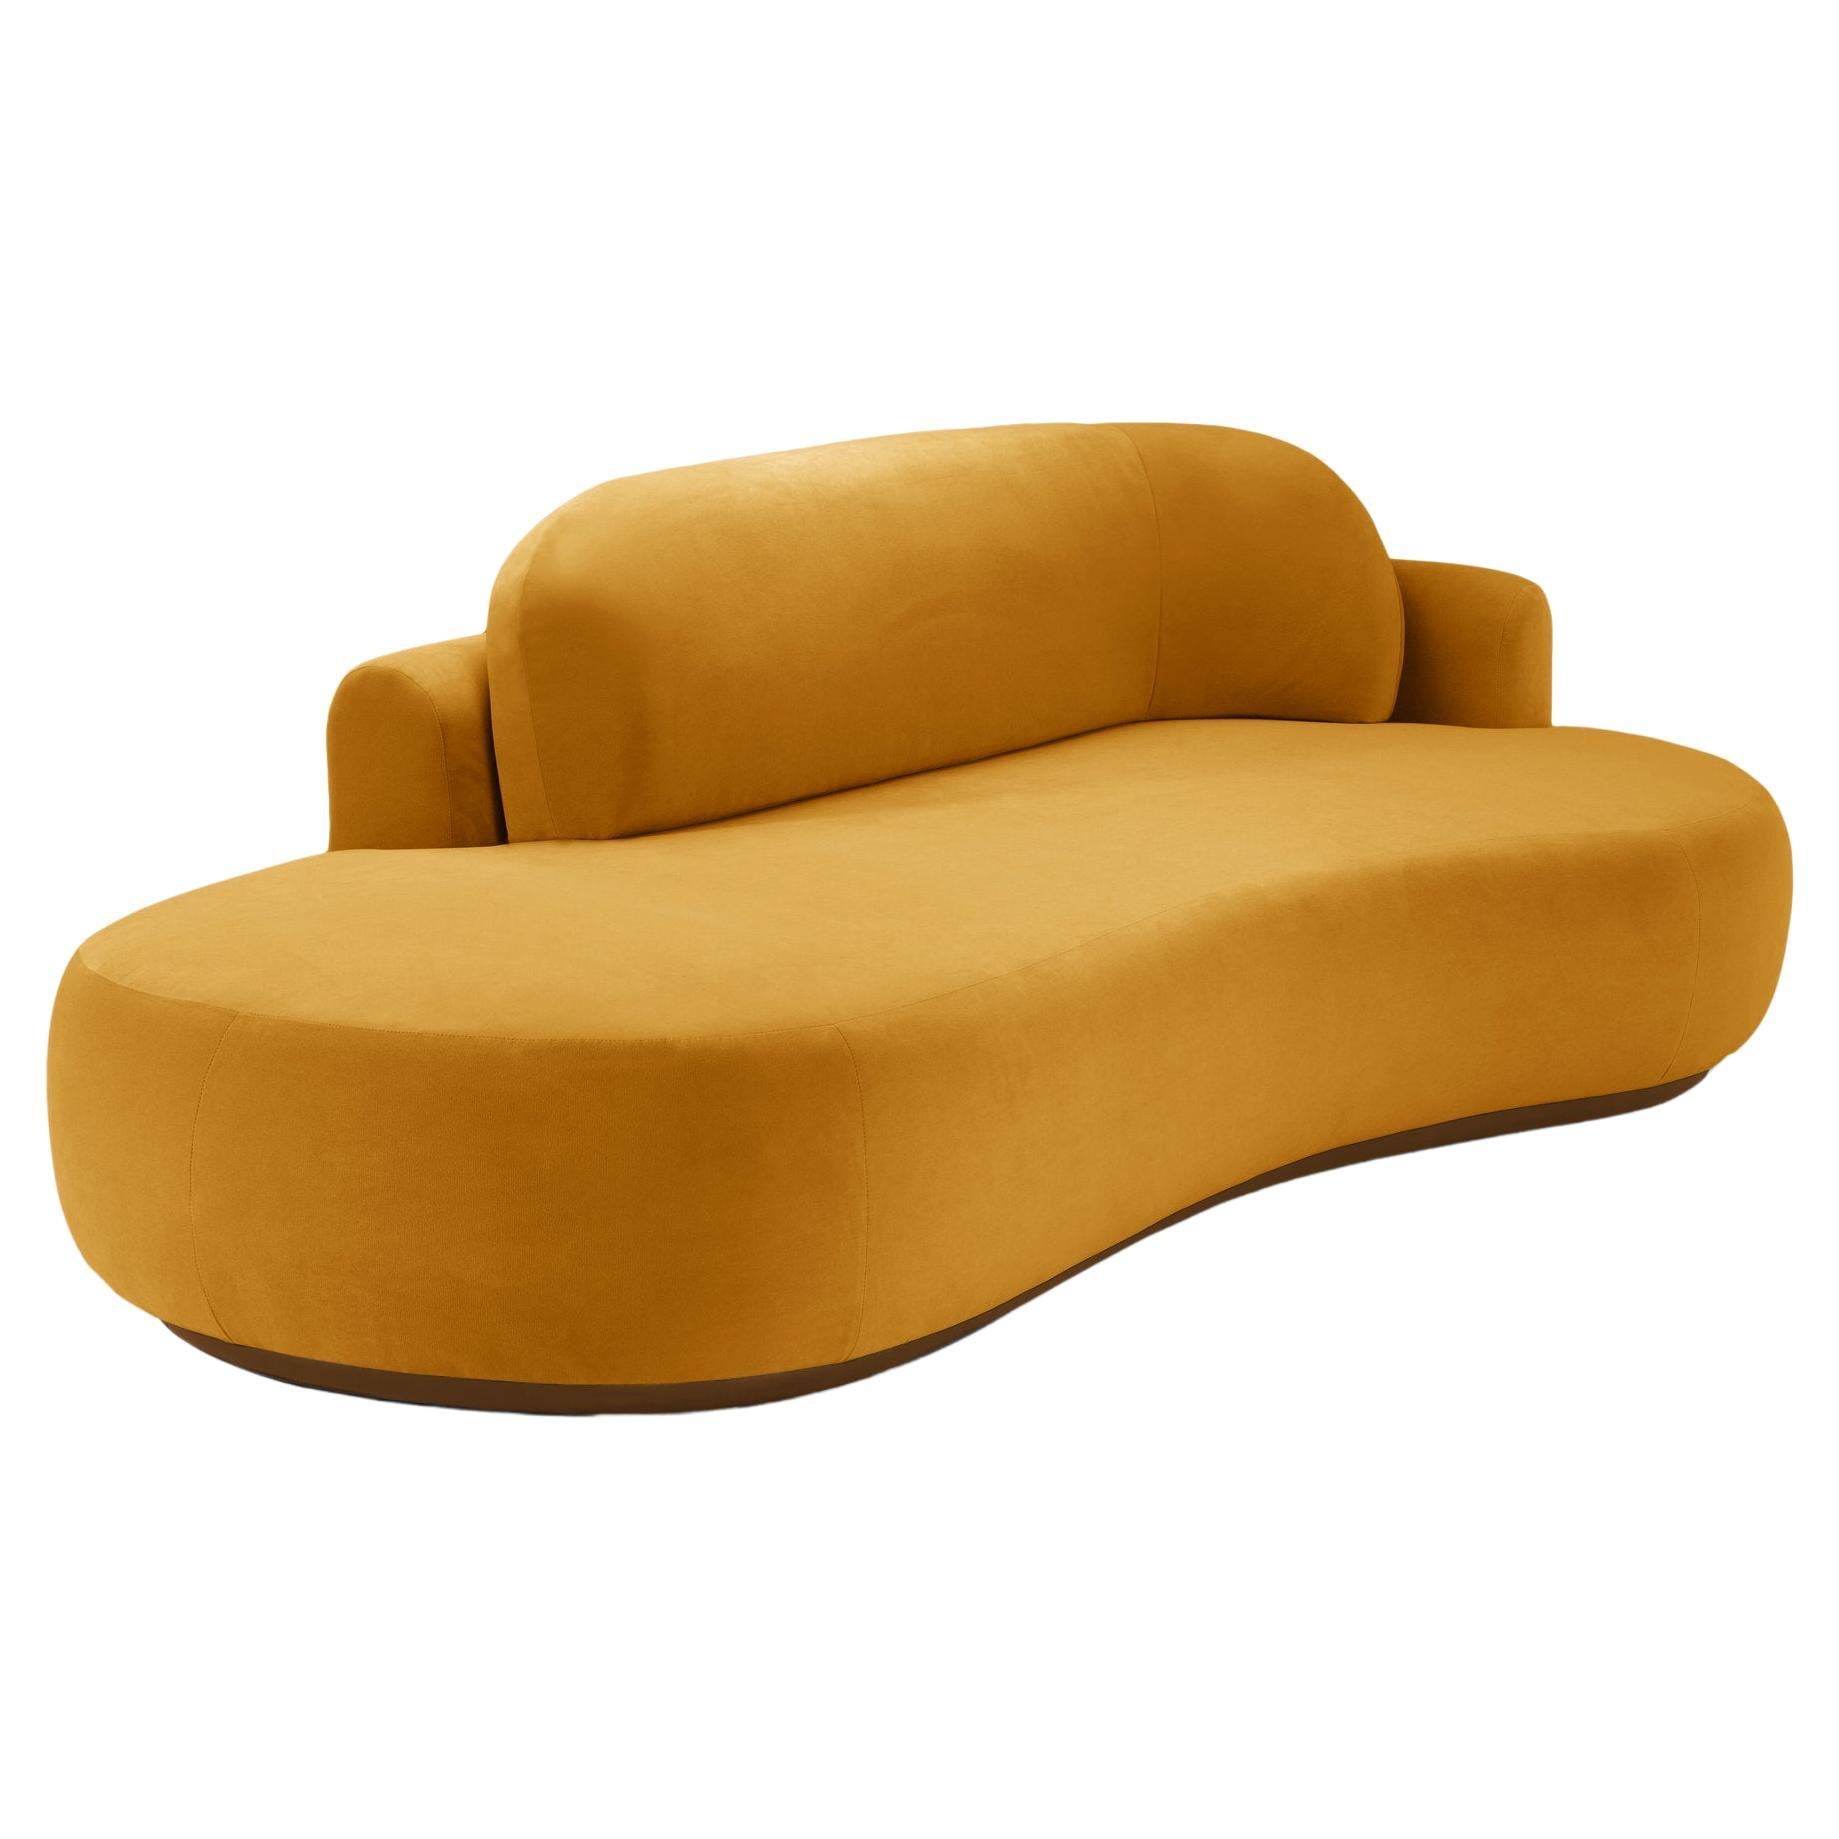 Naked Curved Sofa Single with Beech Ash-056-1 and Corn For Sale